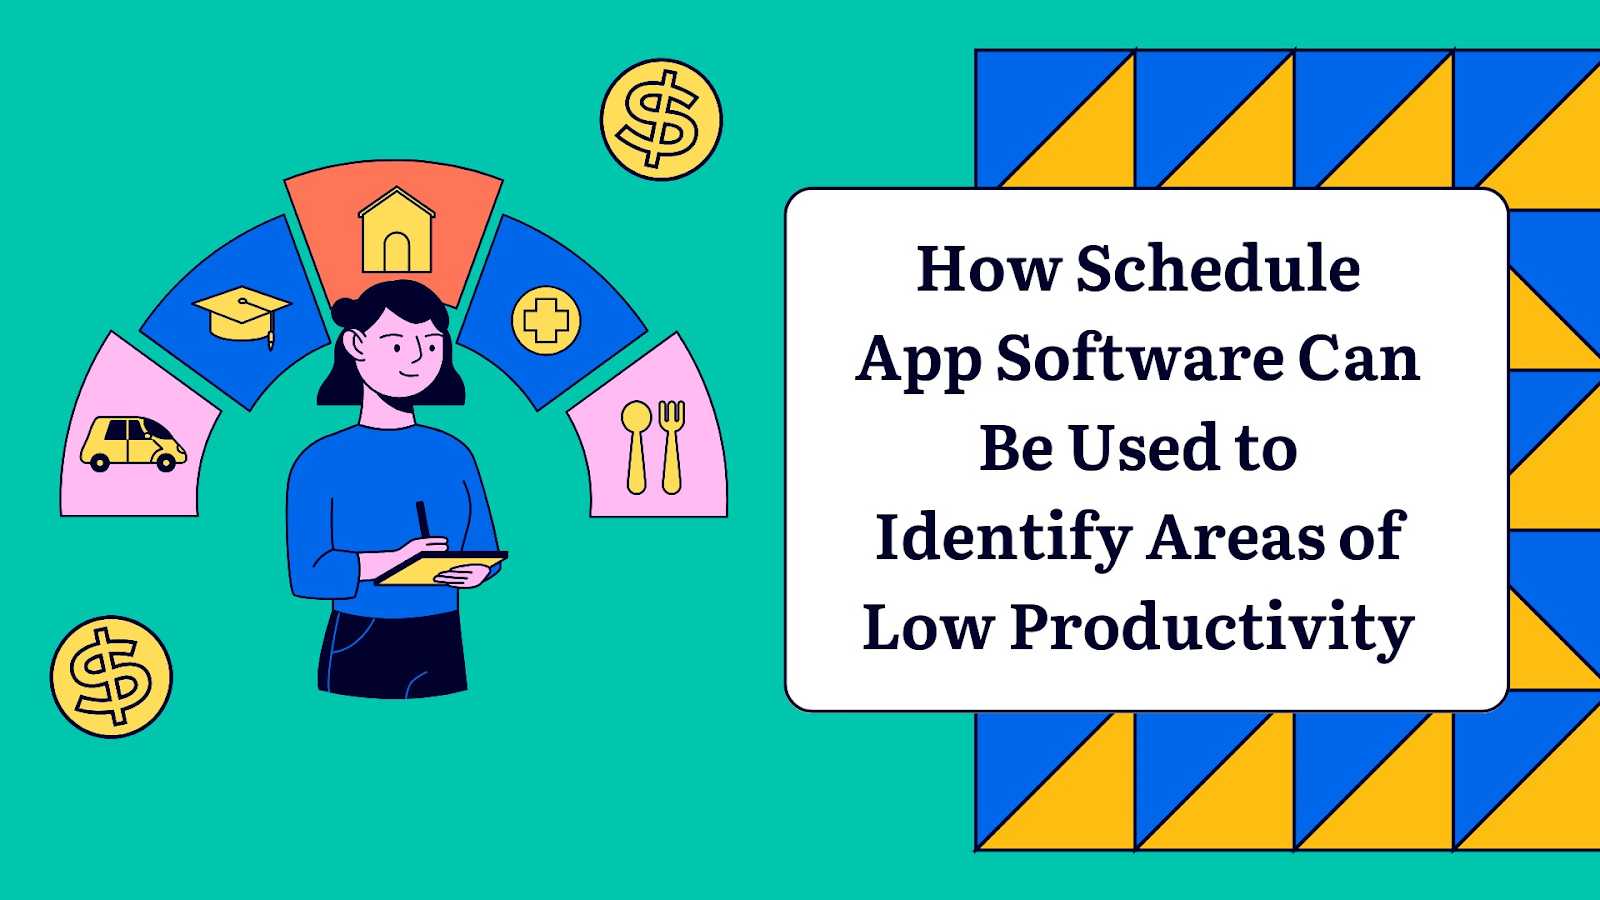 How Schedule App Software Can Be Used to Identify Areas of Low Productivity